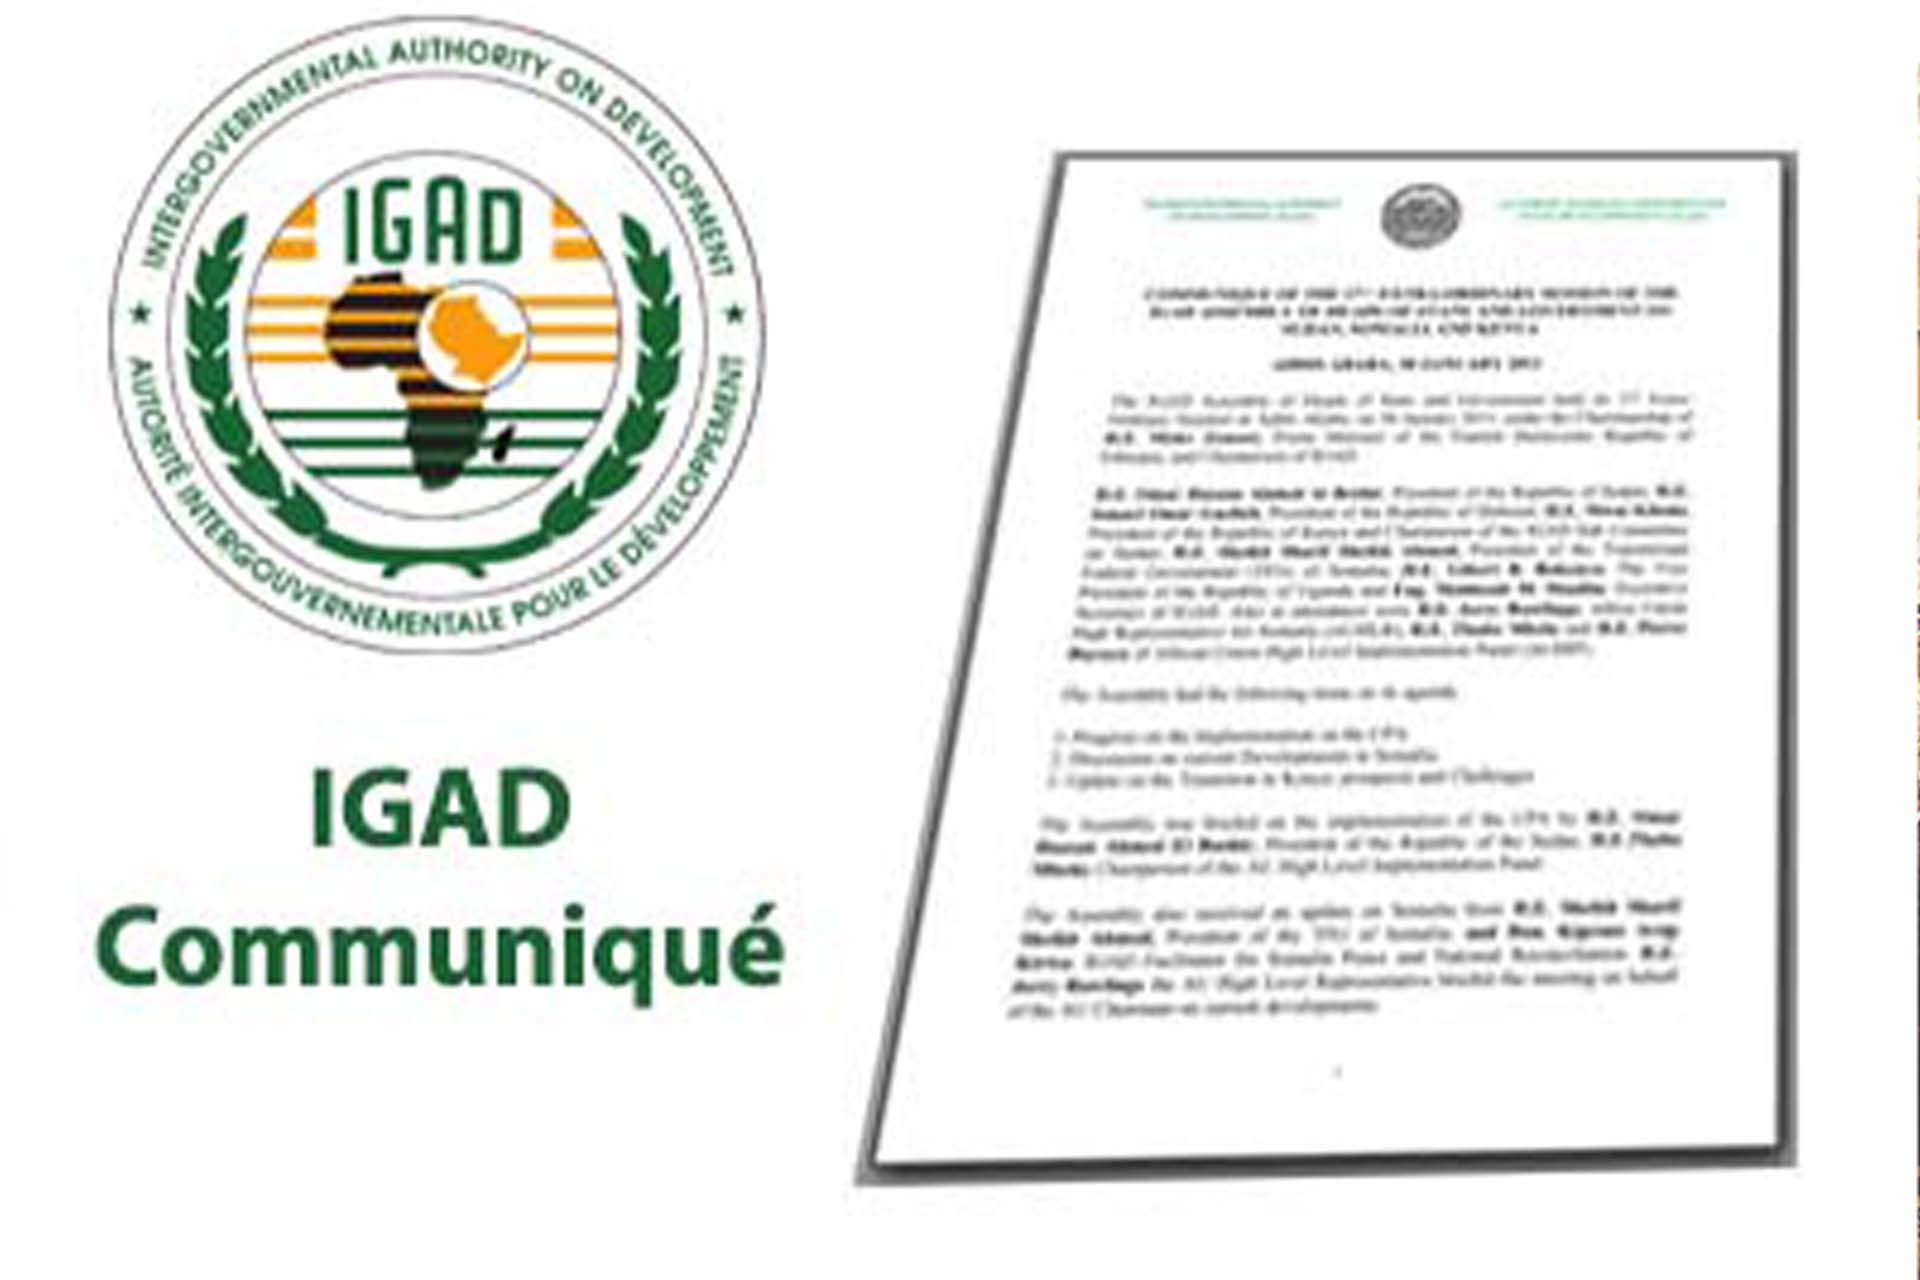 PRESS STATEMENT BY THE EXECUTIVE SECRETARY OF IGAD ON THE INDICTMENT OF PRESIDENT OF SUDAN